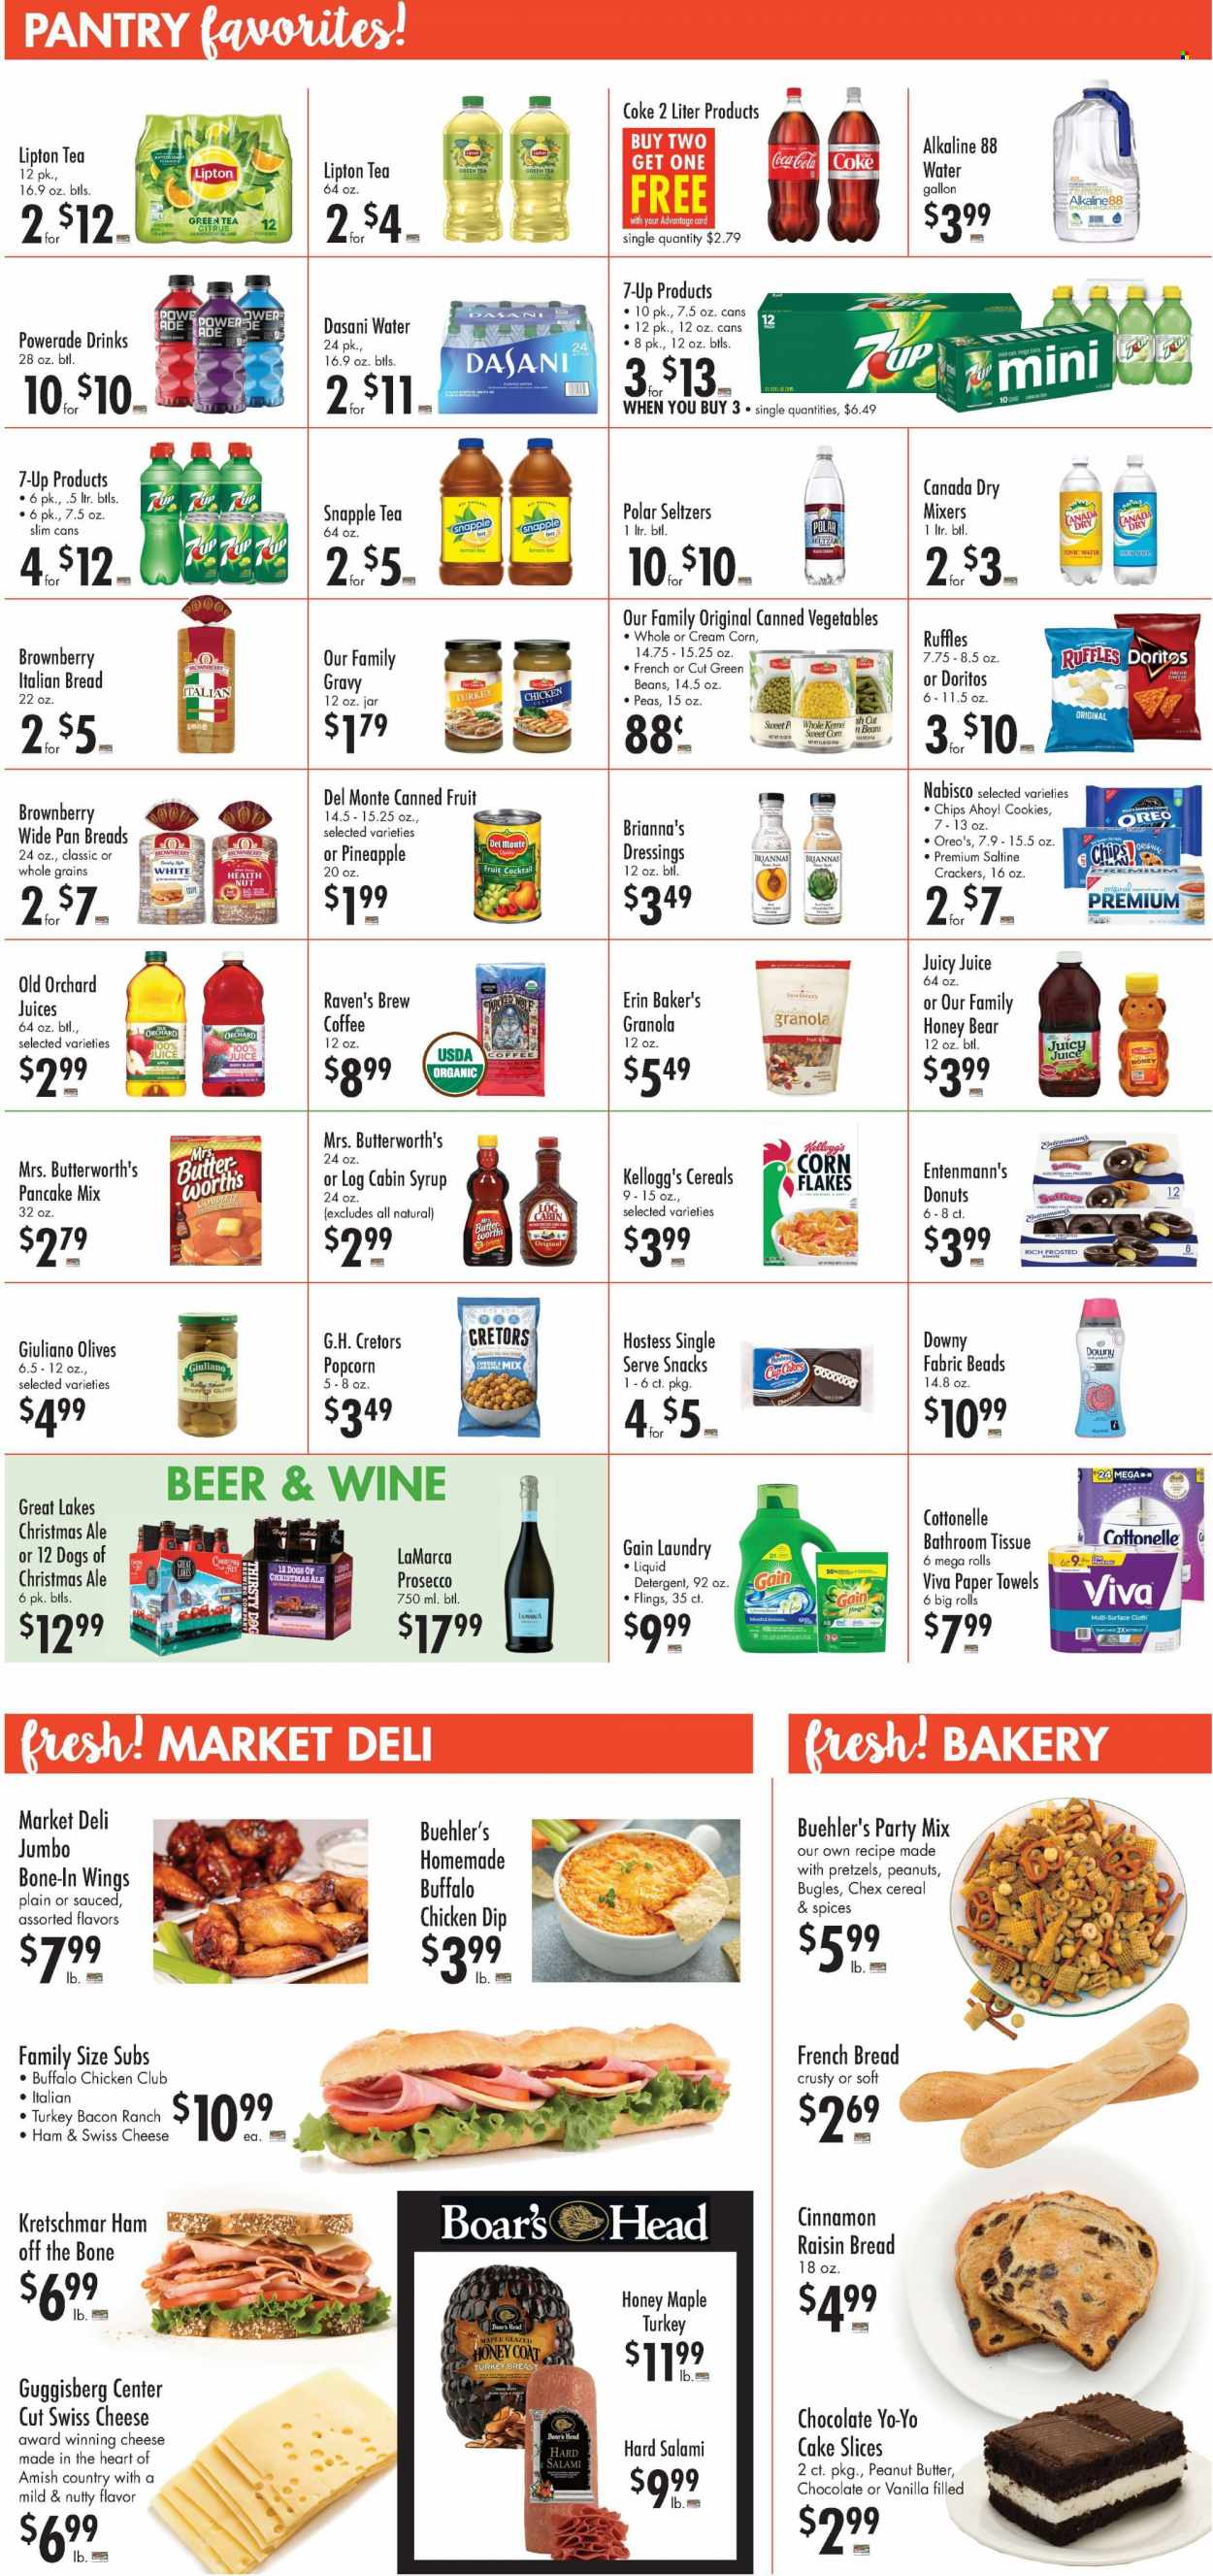 thumbnail - Buehler's Flyer - 11/25/2022 - 12/06/2022 - Sales products - bread, pretzels, french bread, donut, Entenmann's, pancakes, bacon, salami, turkey bacon, ham, swiss cheese, cheese, Oreo, milk, cookies, chocolate, snack, crackers, Kellogg's, Chips Ahoy!, Doritos, chips, popcorn, Ruffles, olives, canned vegetables, canned fruit, Del Monte, cereals, granola, corn flakes, peanut butter, syrup, peanuts, Canada Dry, Coca-Cola, Powerade, juice, Lipton, tonic, 7UP, Snapple, Club Soda, seltzer water, purified water, green tea, tea, coffee, prosecco, wine, beer, bath tissue, Cottonelle, kitchen towels, paper towels, detergent, Gain, liquid detergent, Downy Laundry, pan, vitamin c. Page 2.